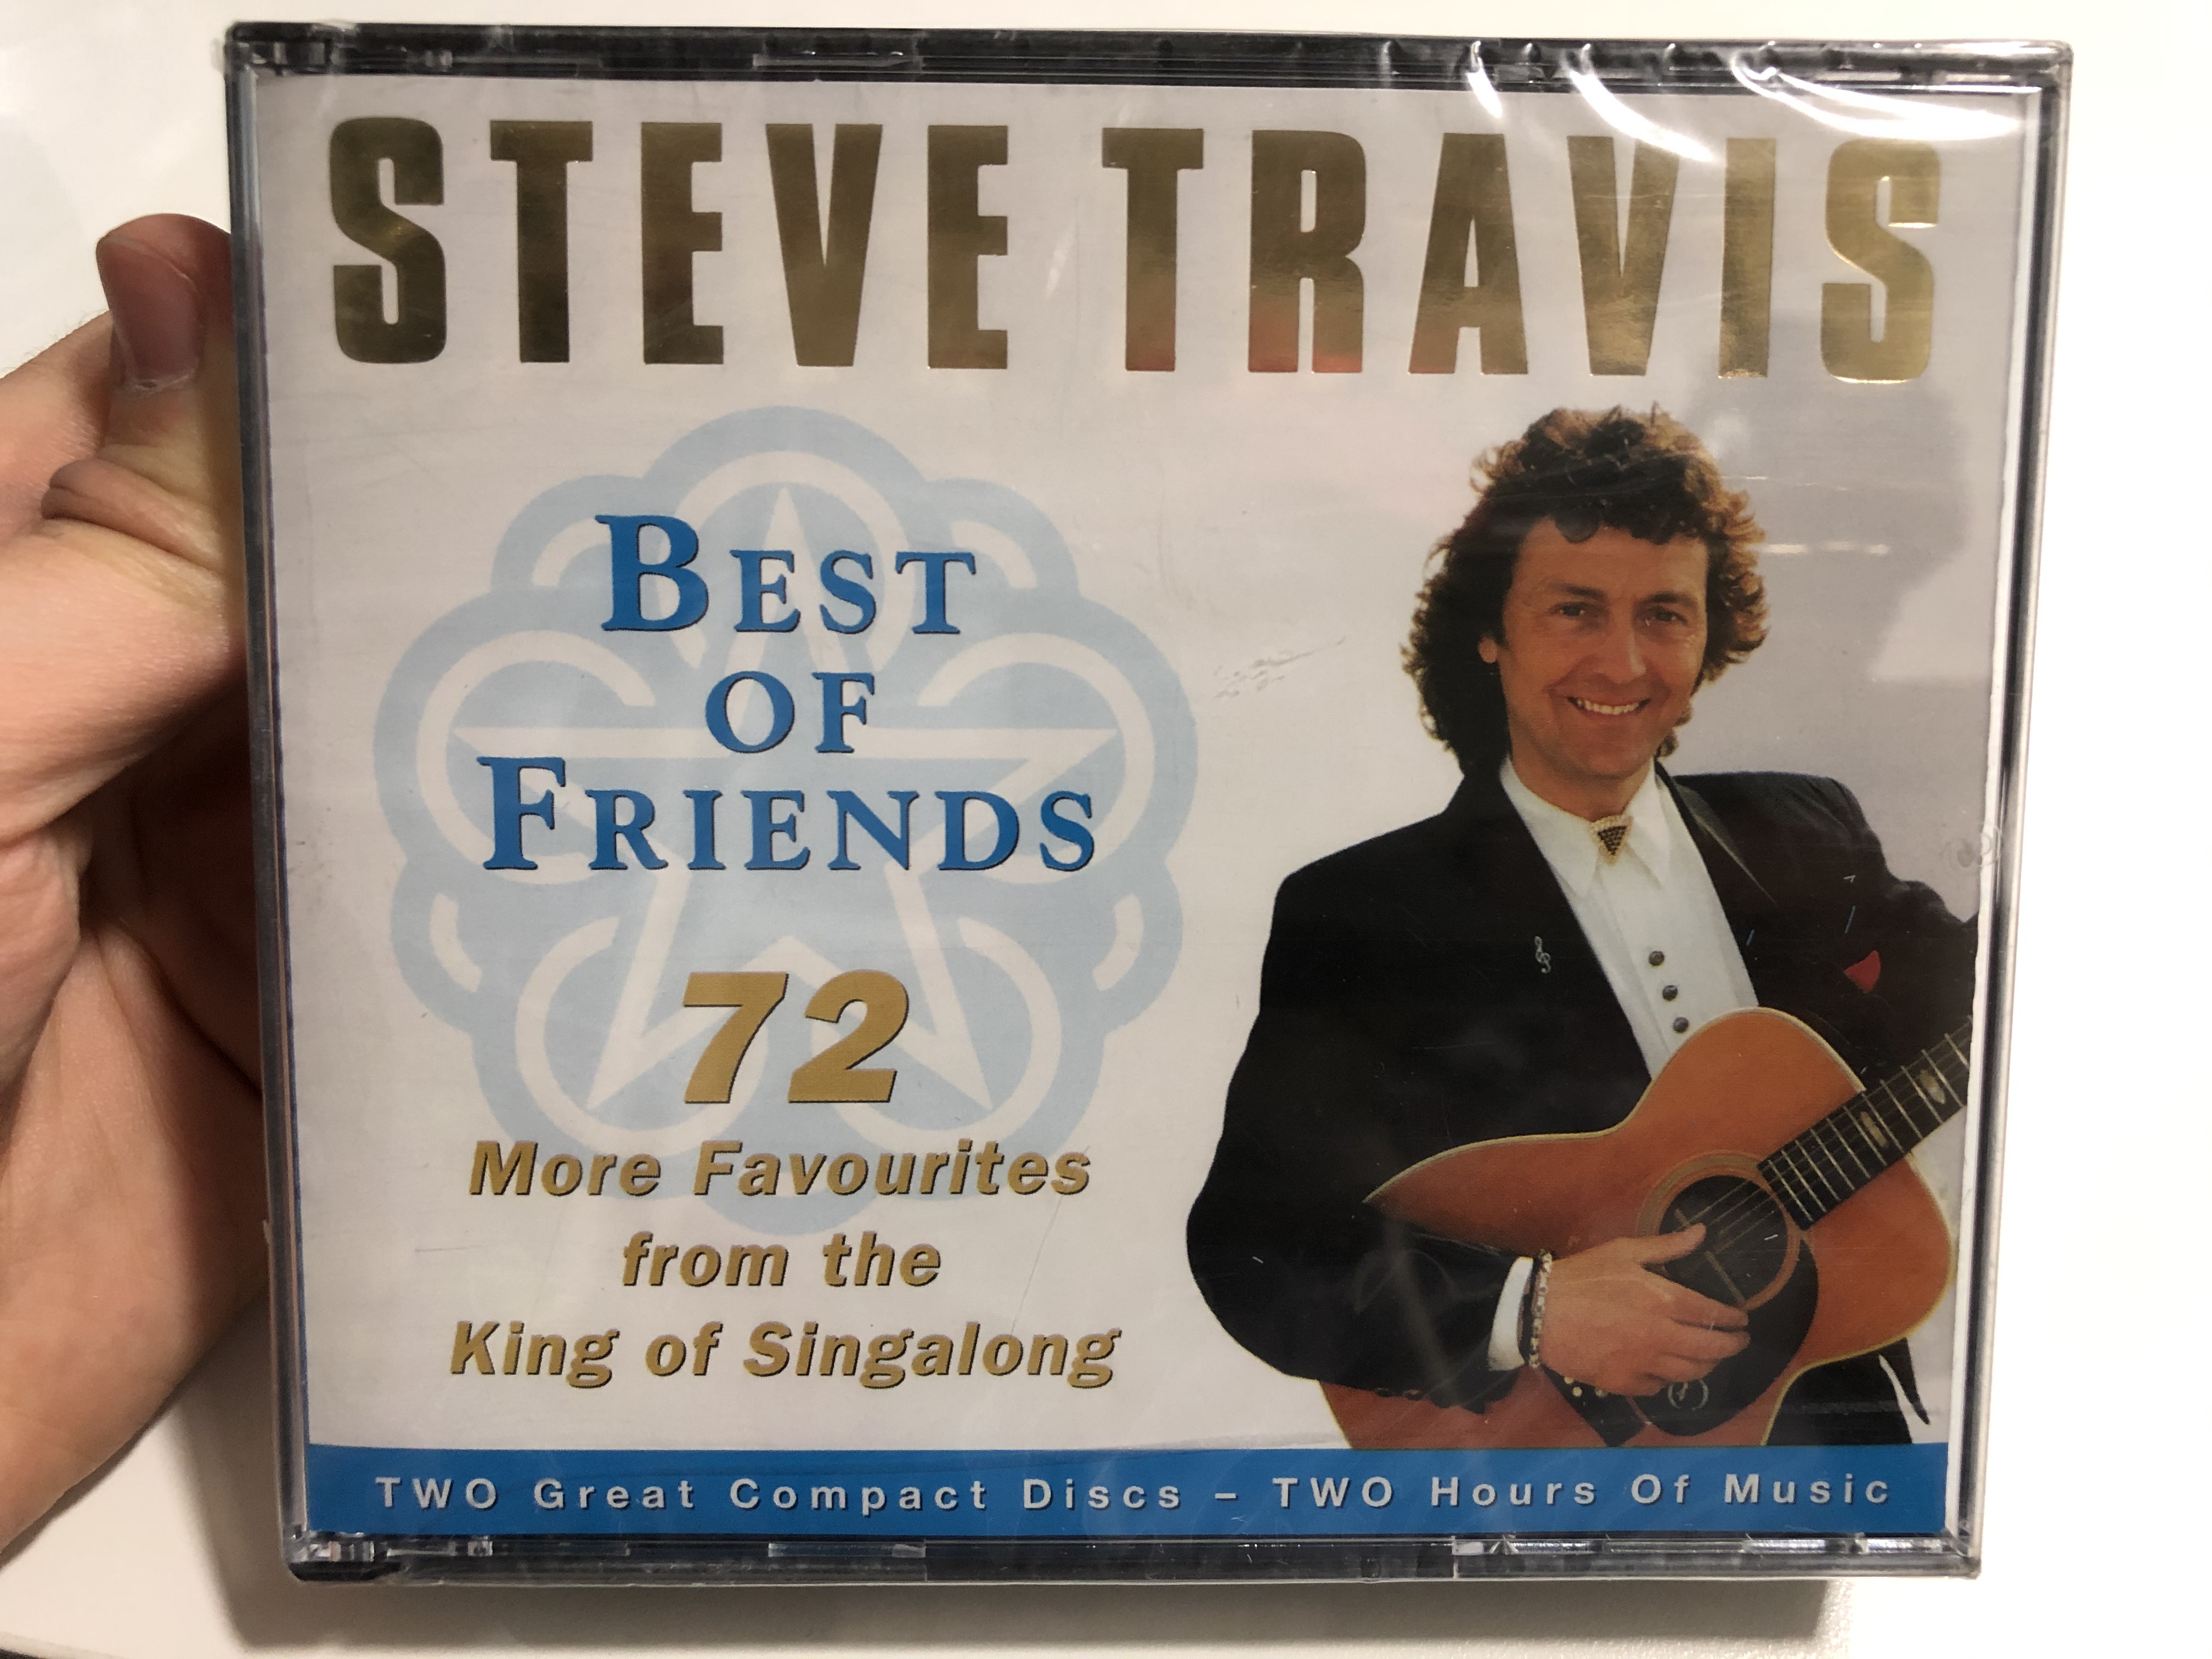 steve-travis-best-of-friends-72-more-favourites-from-the-king-of-singalong-two-great-compact-disc-two-hours-of-music-prism-leisure-2x-audio-cd-2004-platcd-4934-1-.jpg